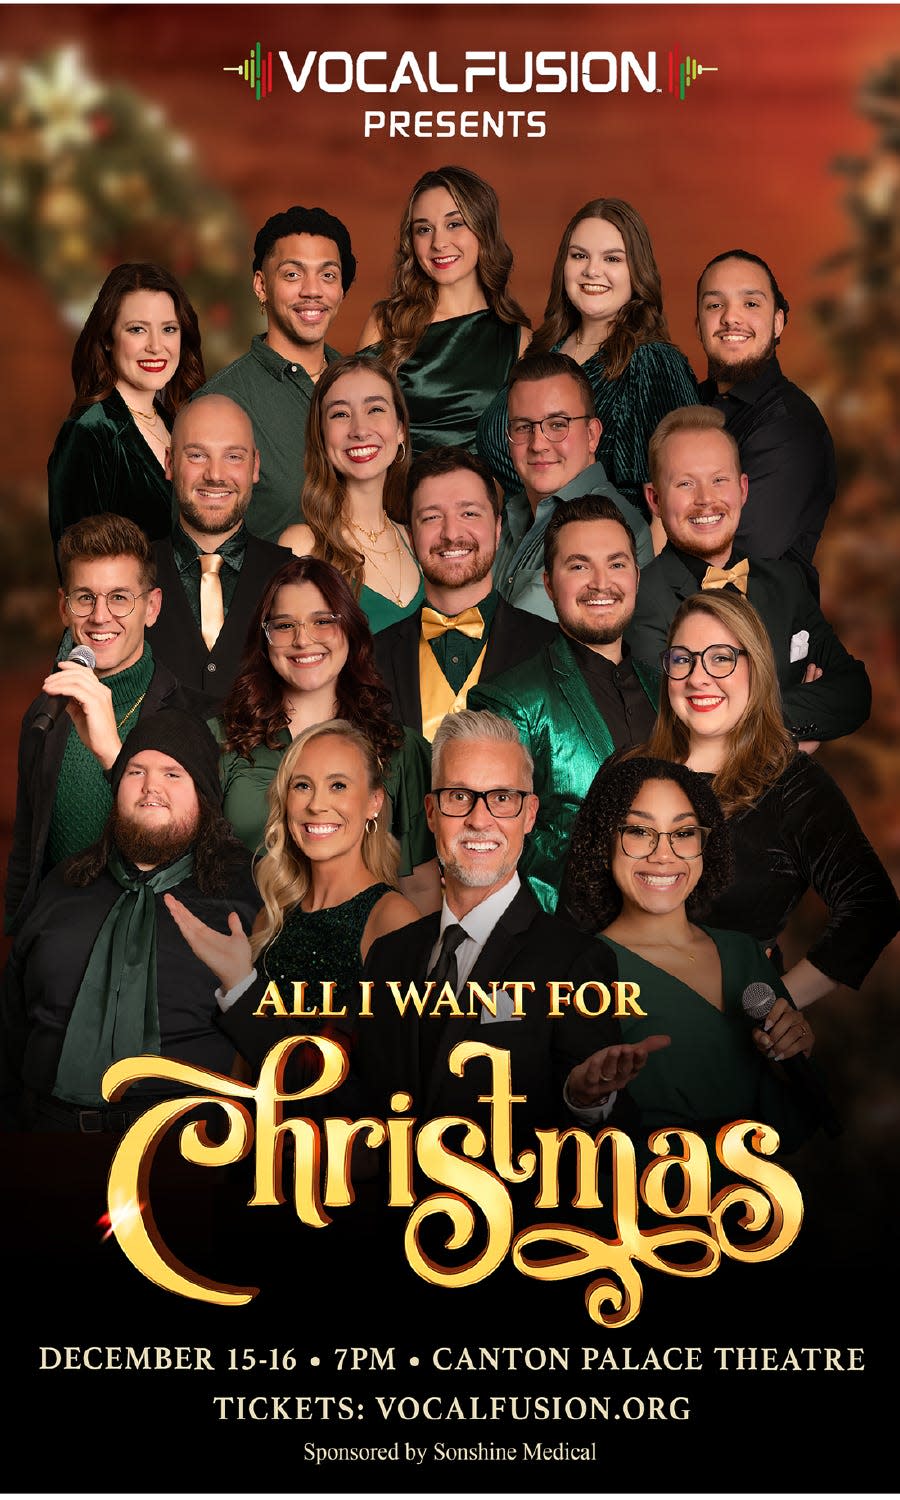 Vocal Fusion, a new a cappella singing group in Stark County, will be presenting the "All I Want For Christmas" show at 7 p.m. on Friday and Saturday at Canton Palace Theatre.